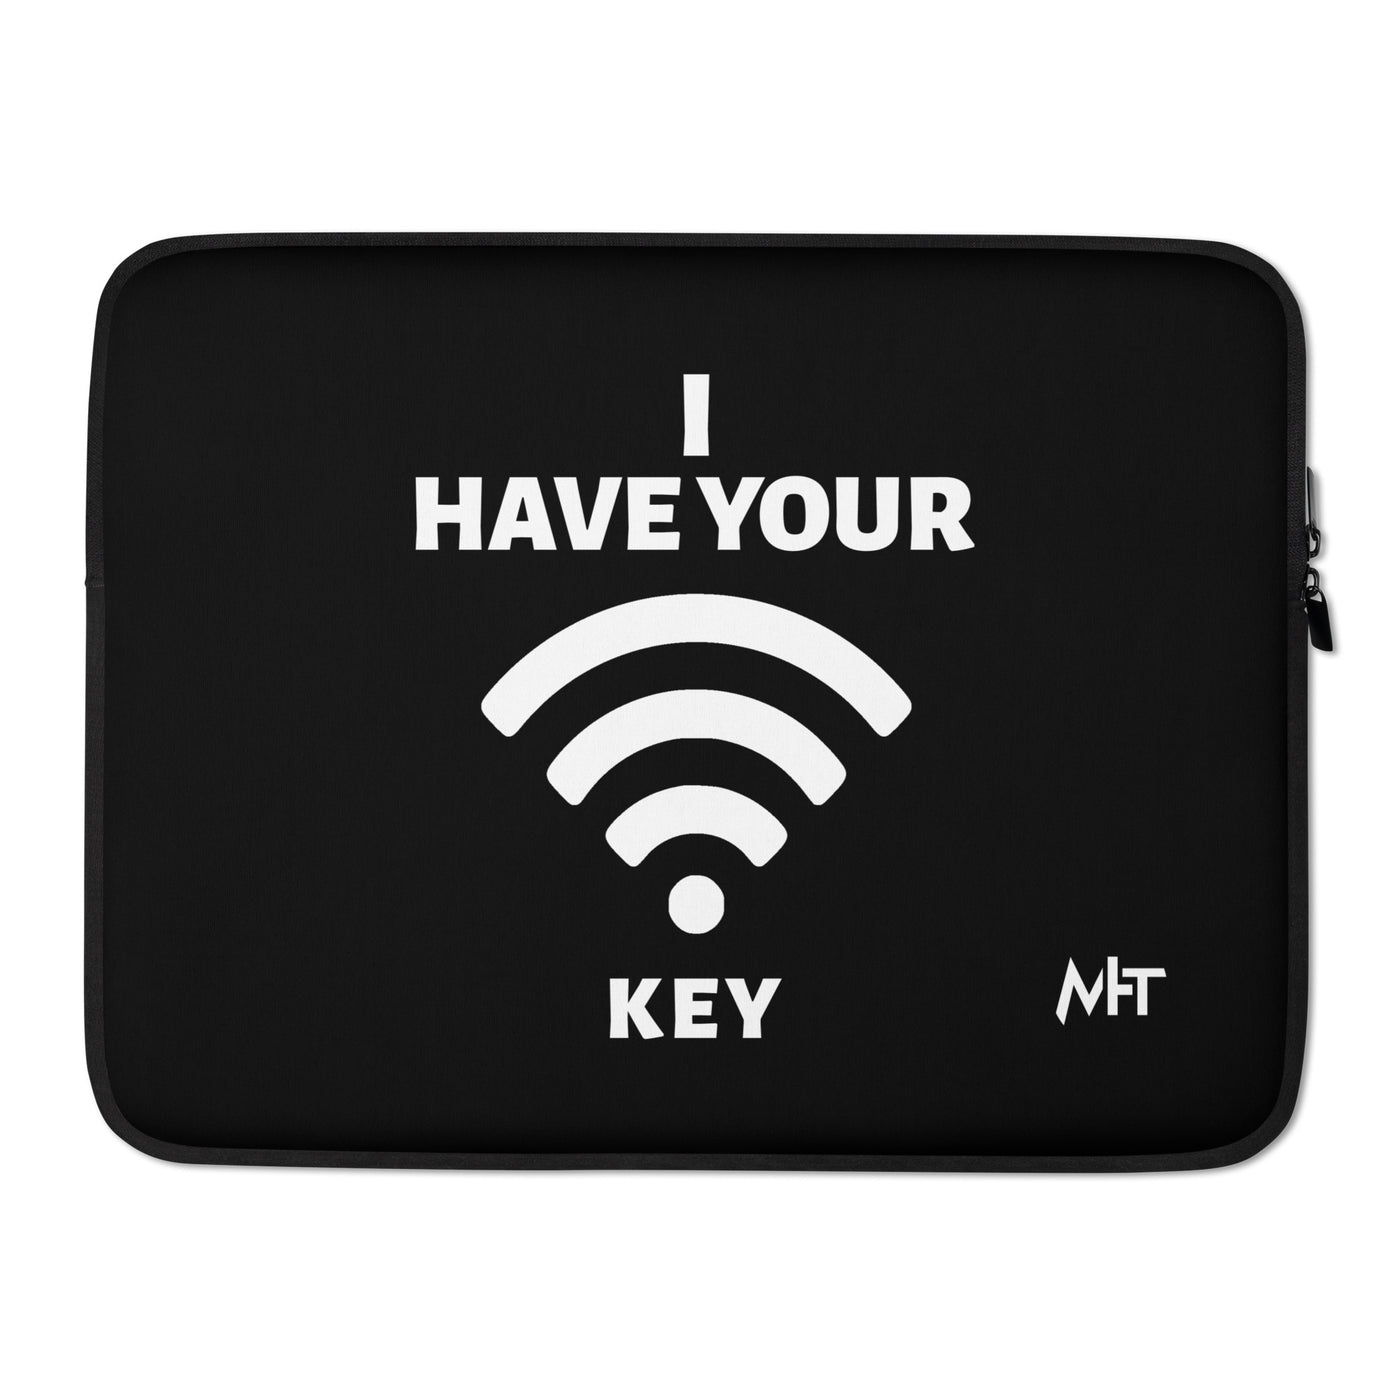 I have your Wi-Fi password - Laptop Sleeve